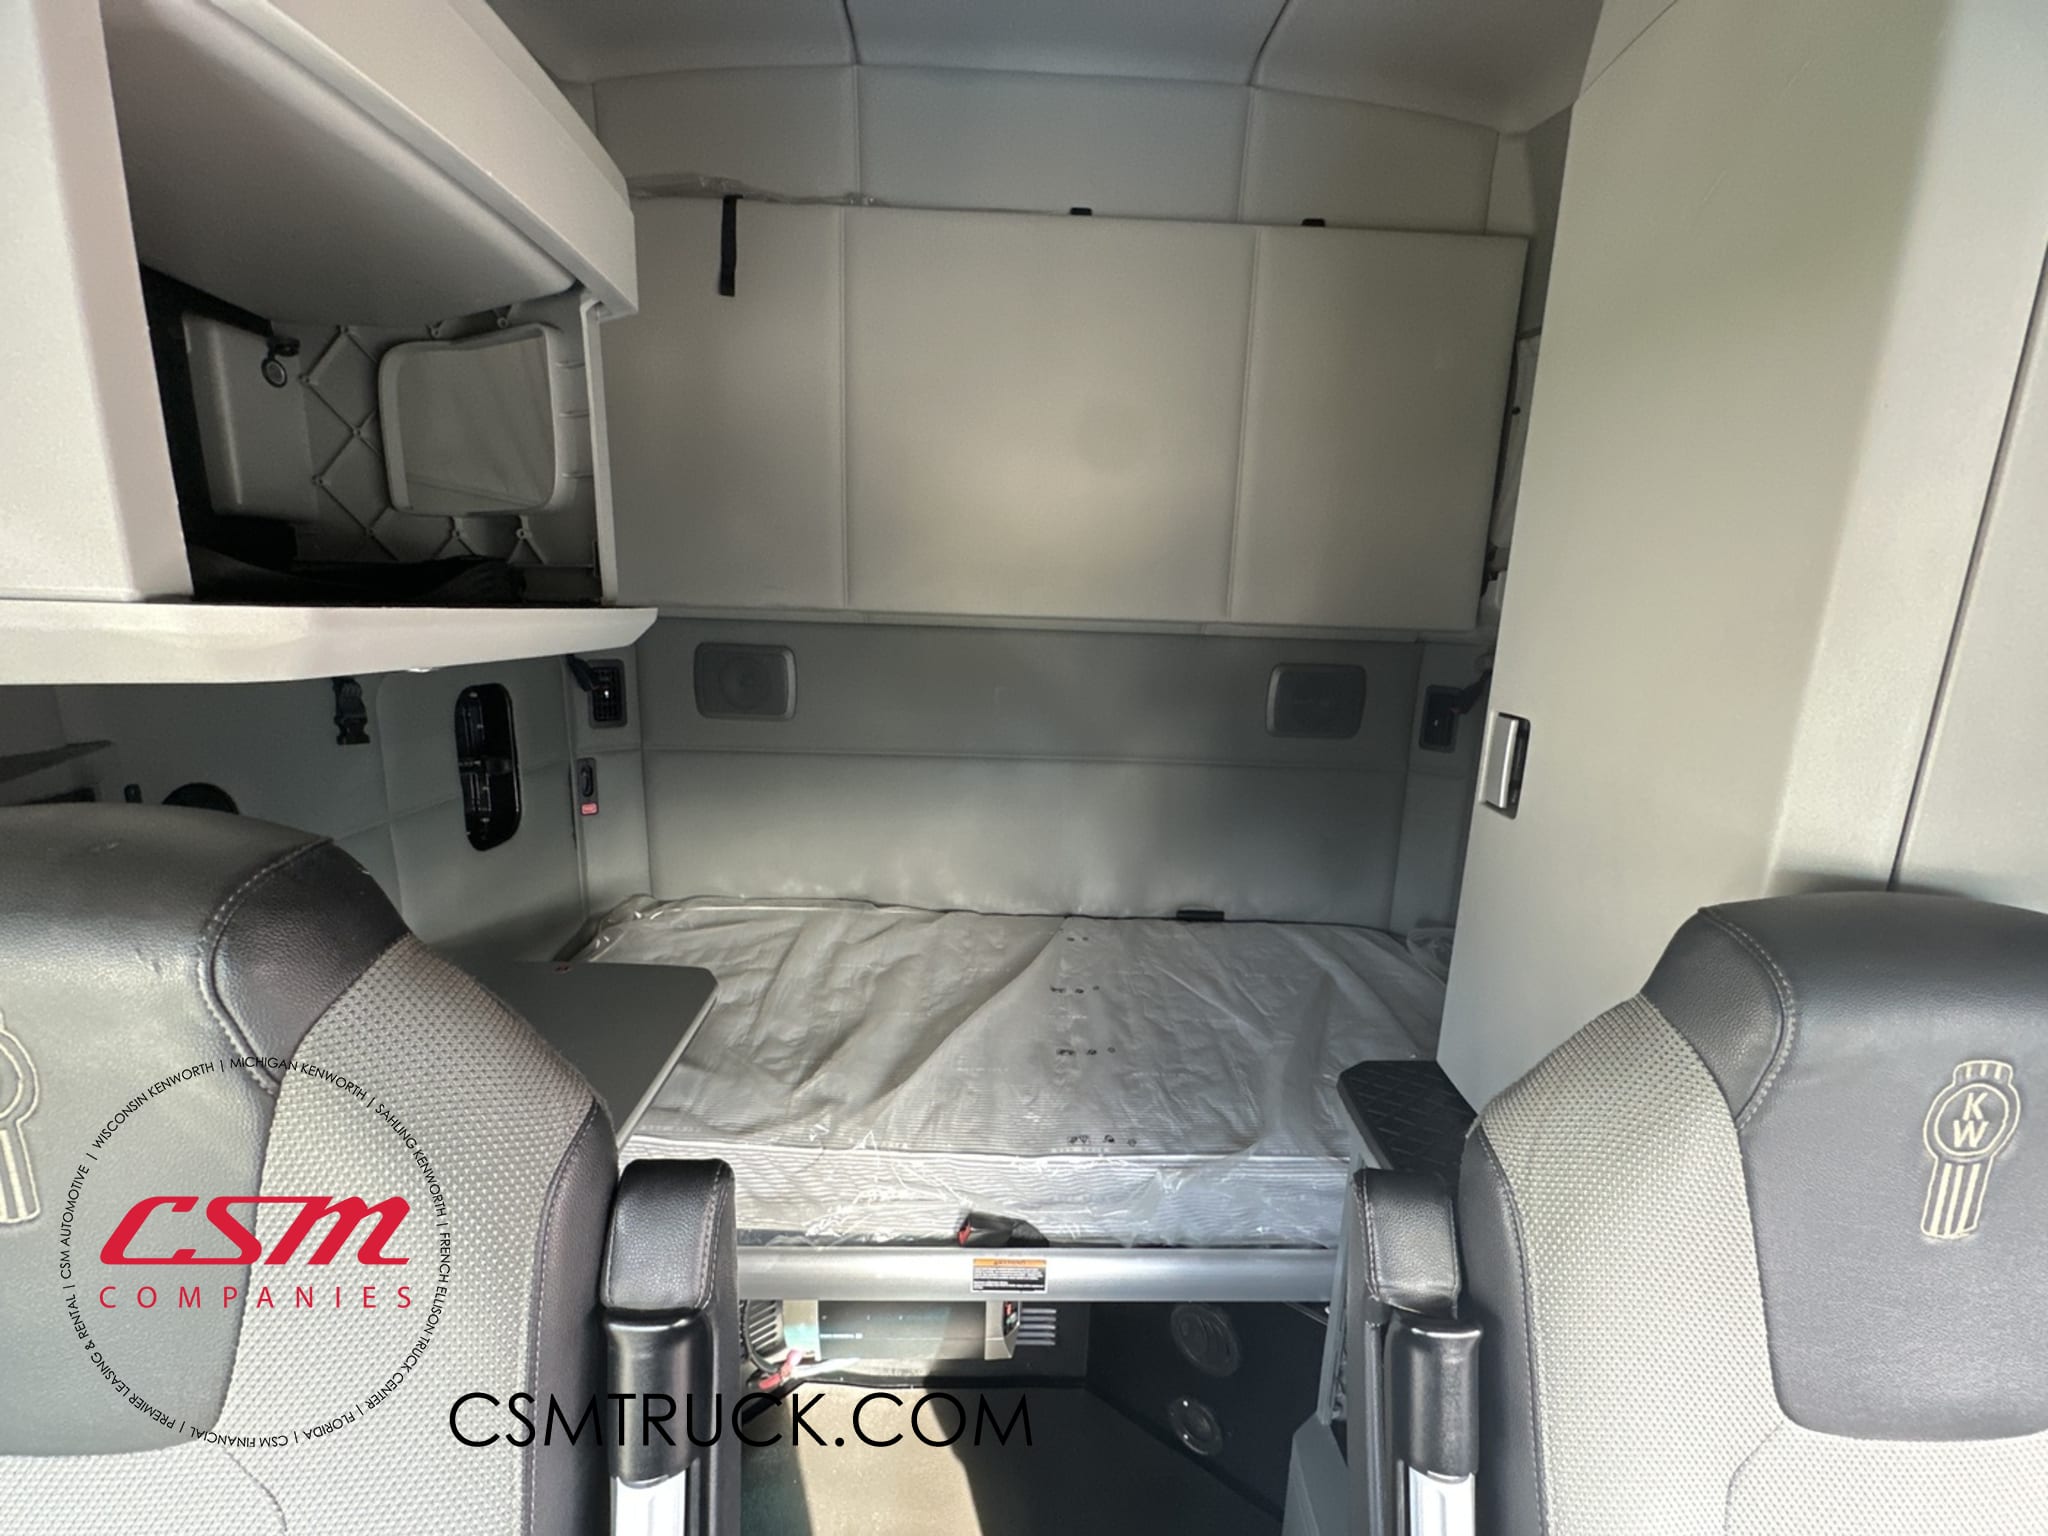 Interior wide sleeper view for this 2020 Kenworth T680 (Stock number: ULJ354390)